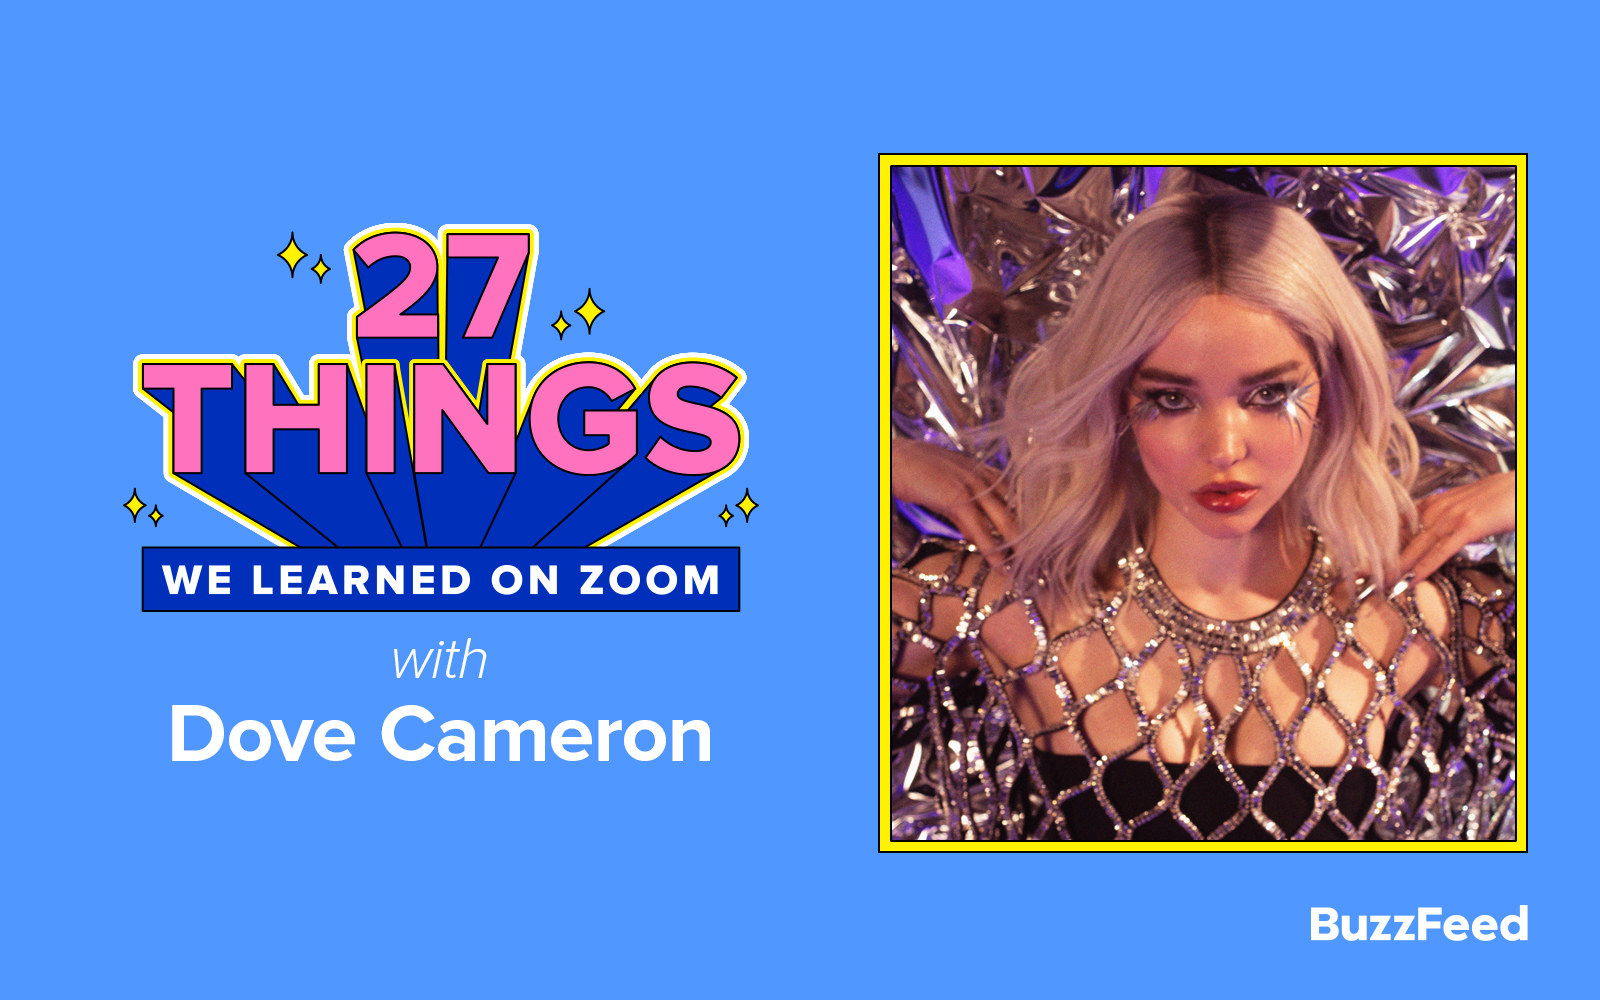 Dove Cameron Gods Game Lyrics know the real meaning of Dove